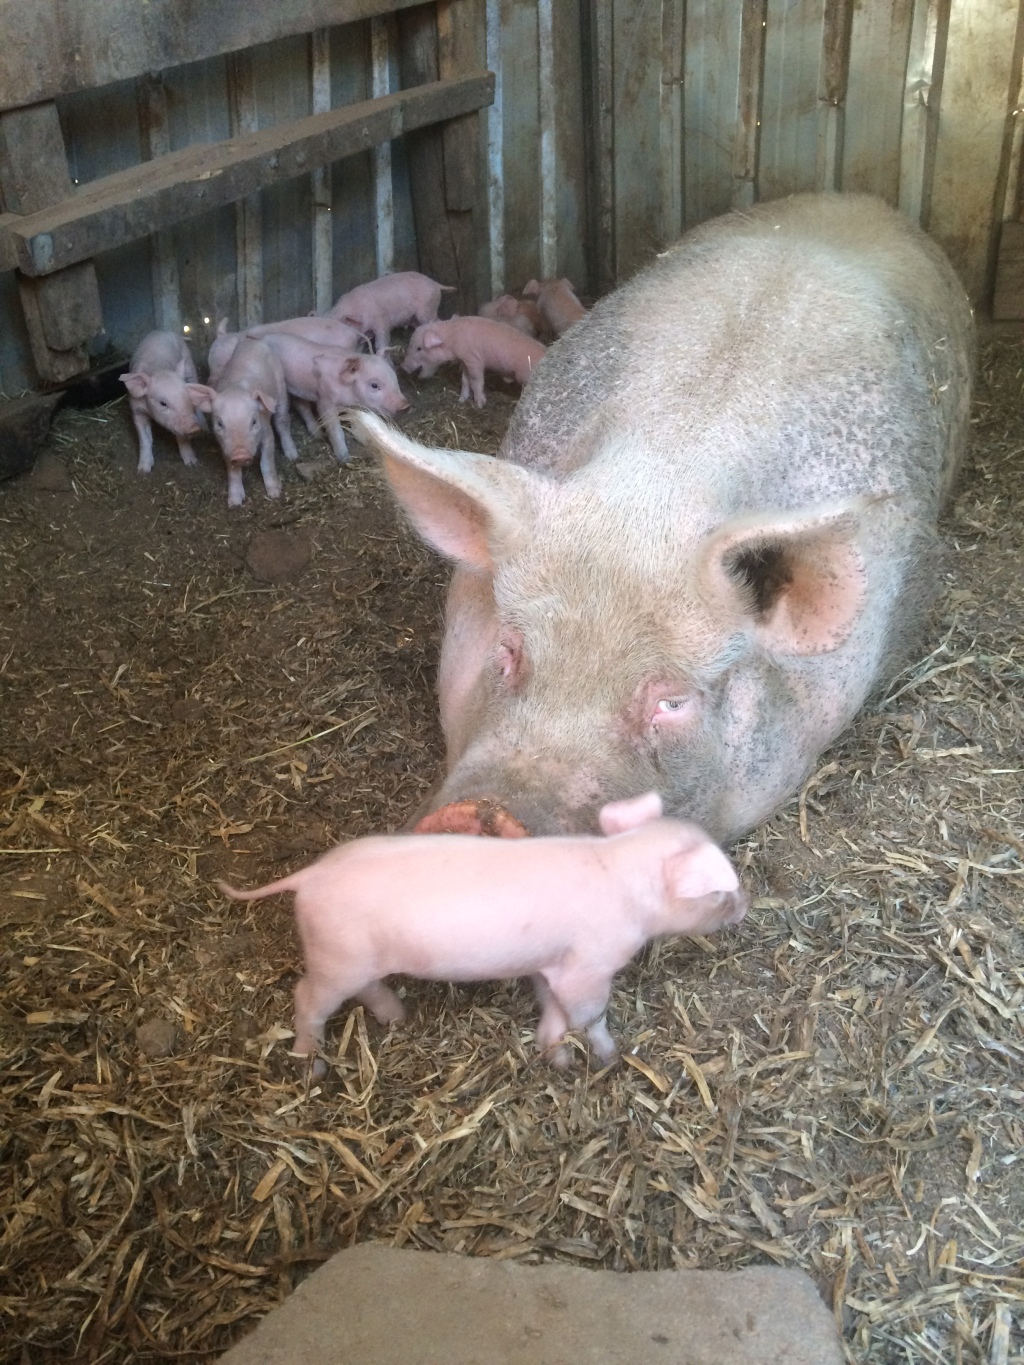 A long suffering mum making sure that she's laying on her teats - no litter of piglets bugging her now.